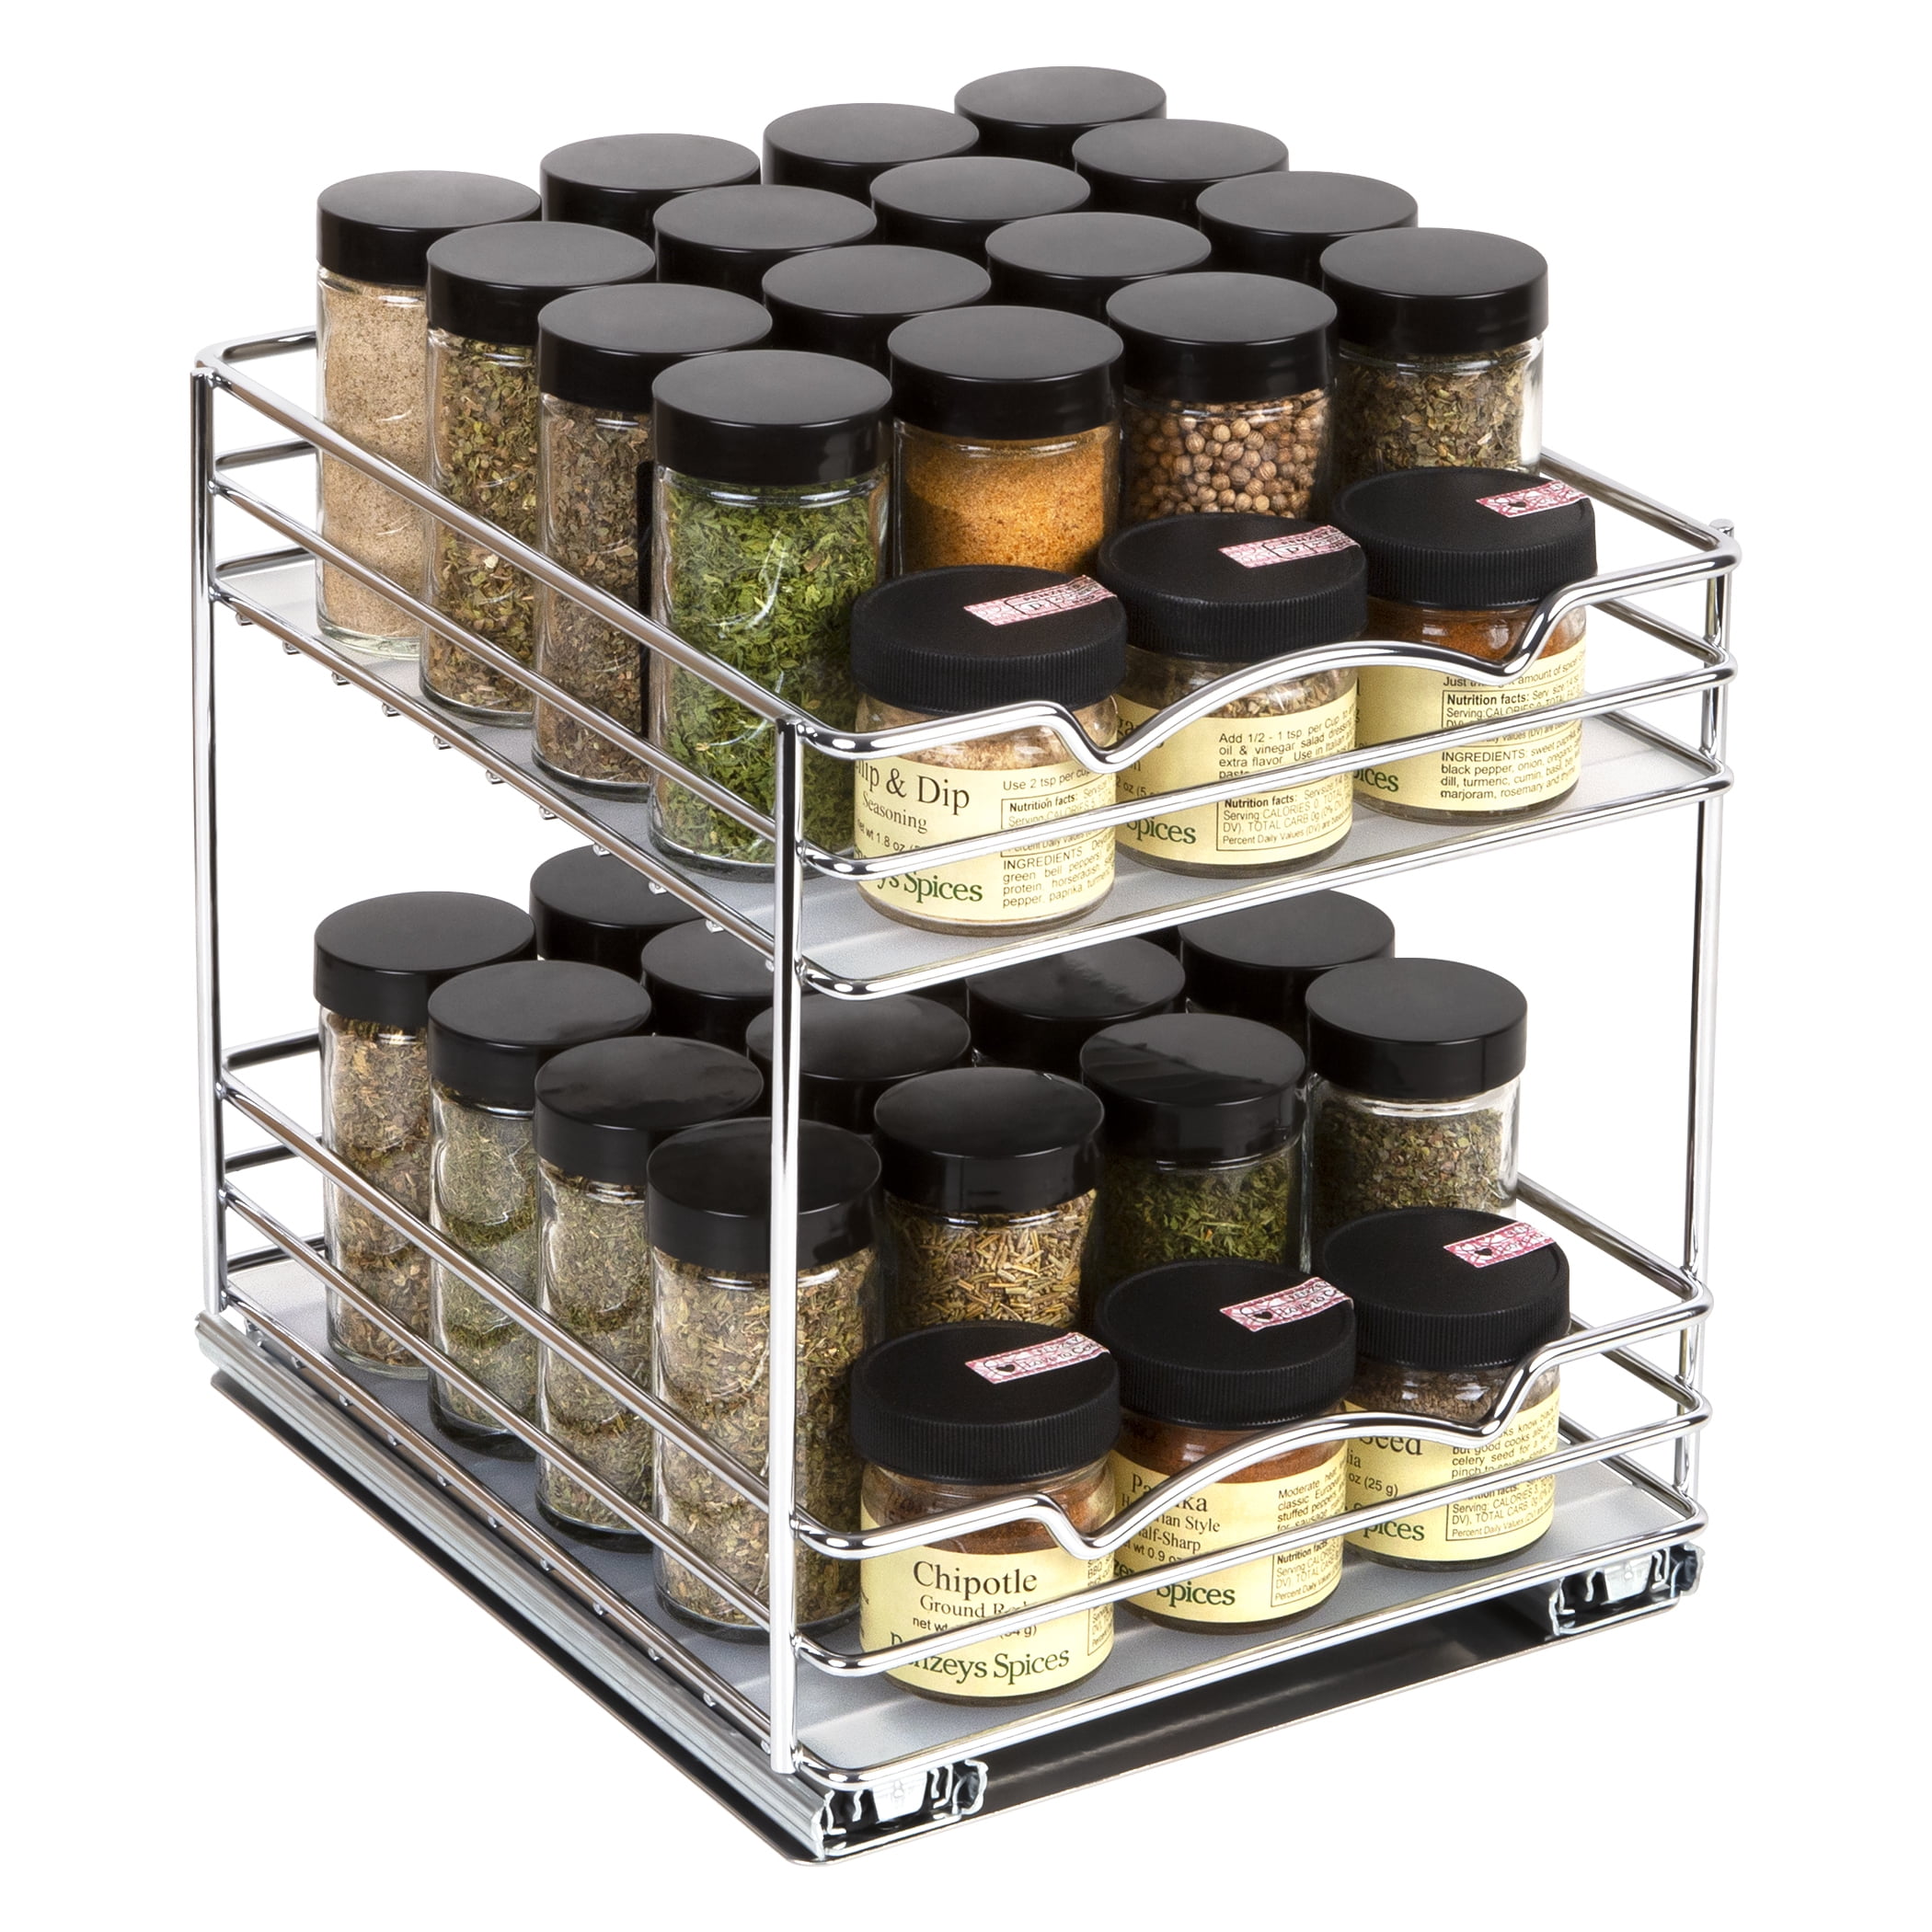 Slide Out Double Spice Rack Upper, Lynk Professional Slide Out Double Spice Rack Upper Cabinet Organizer 6 Wide